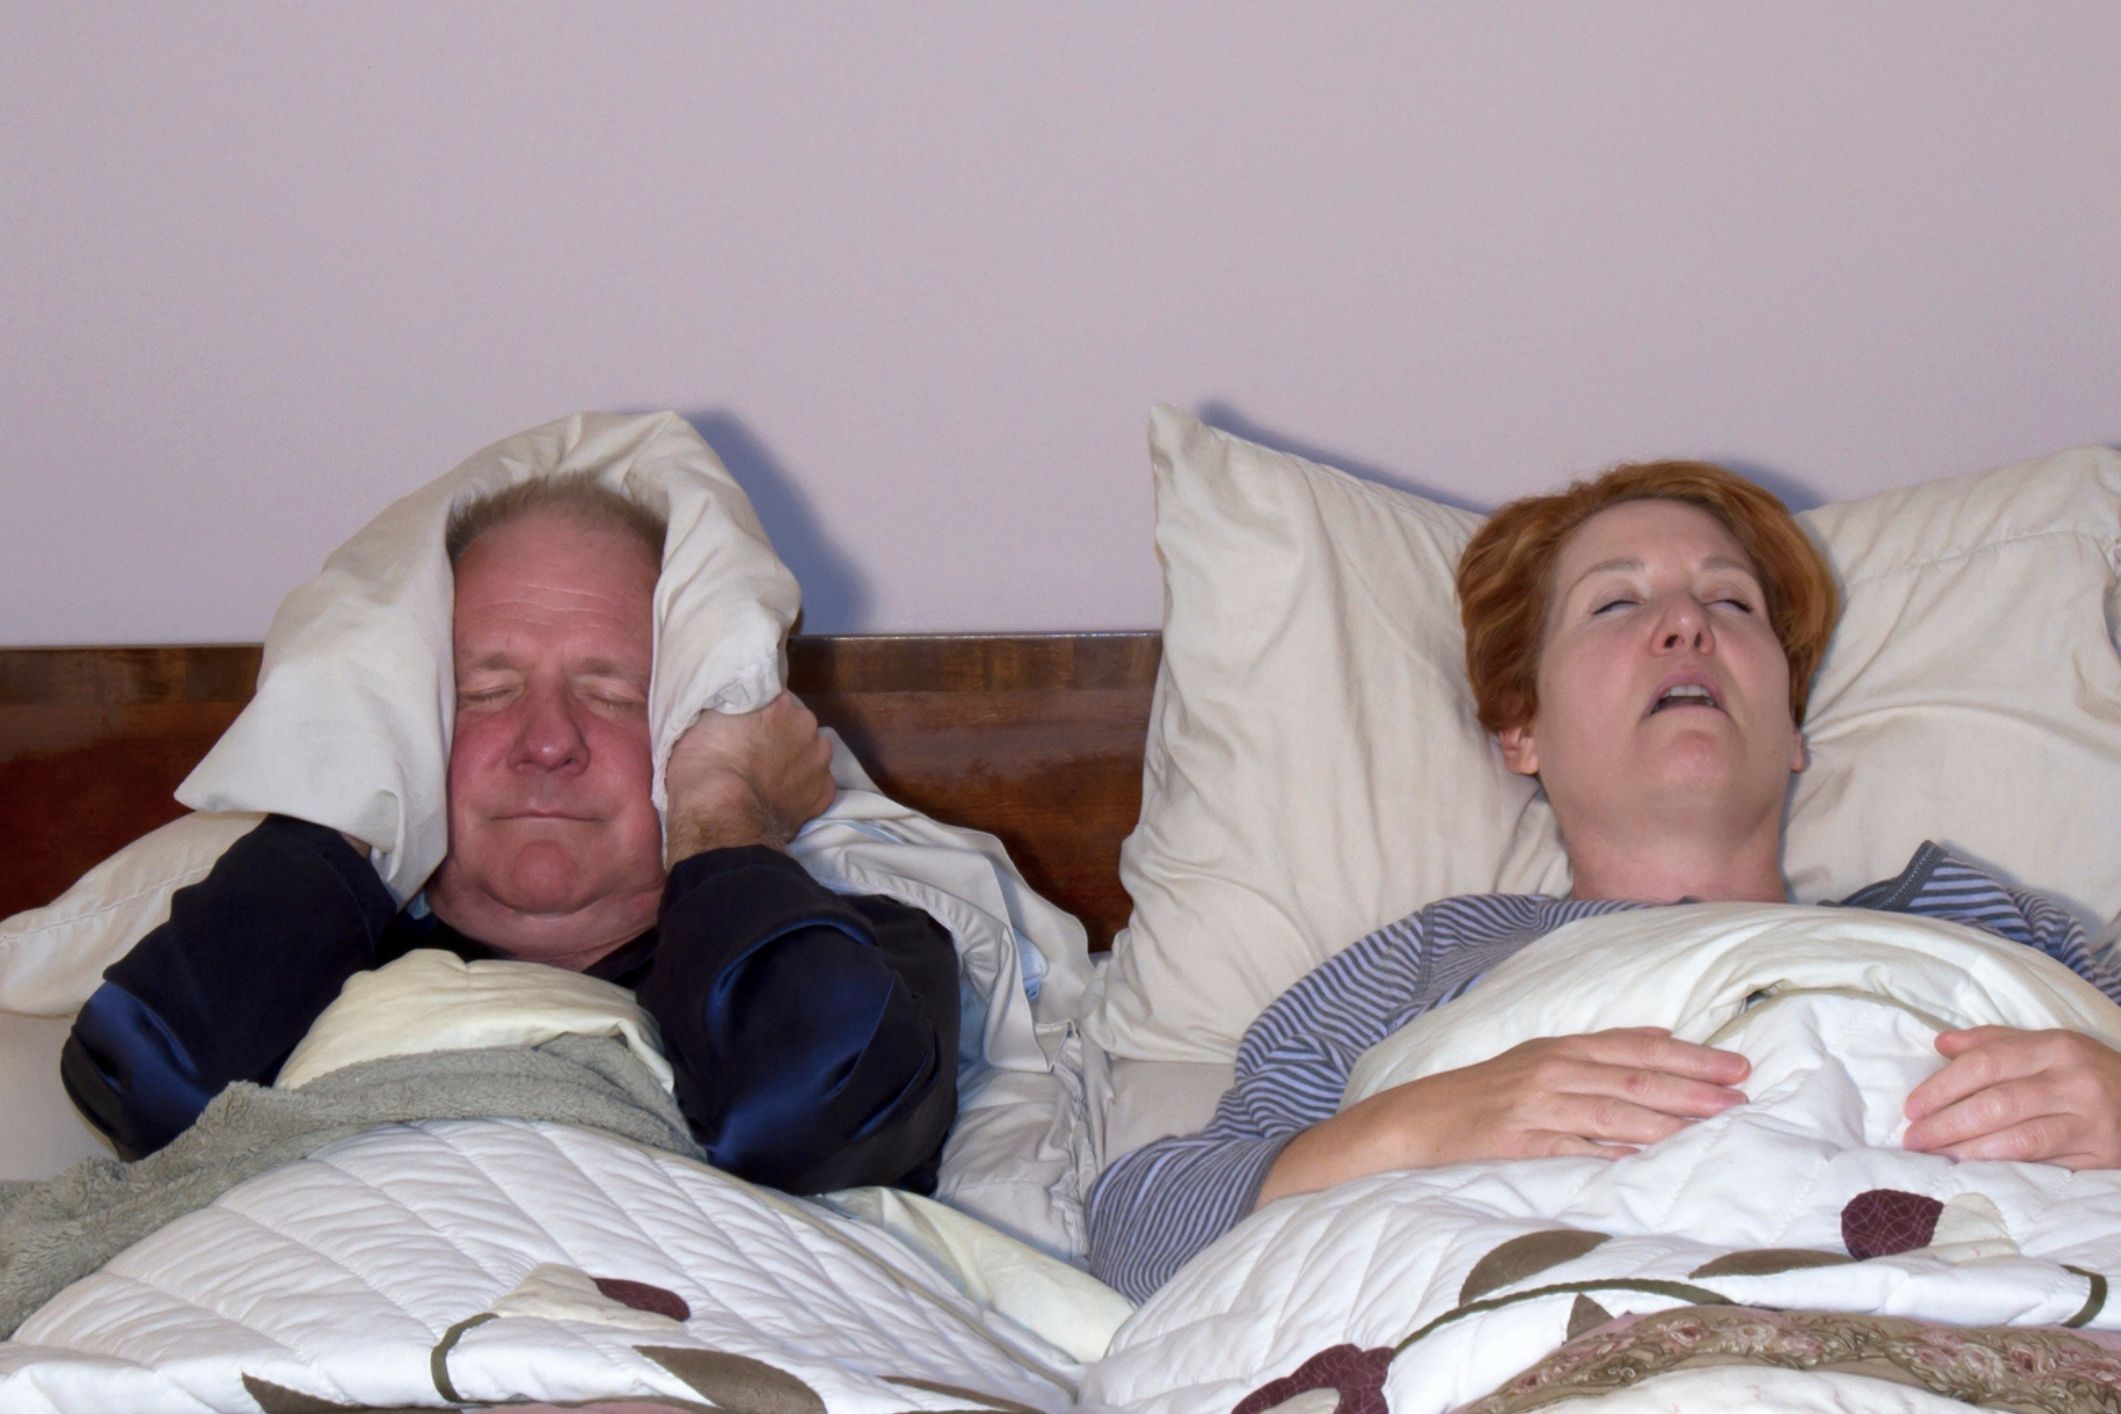 Sleeping longer than 6.5 hours a night associated with dementia according to research